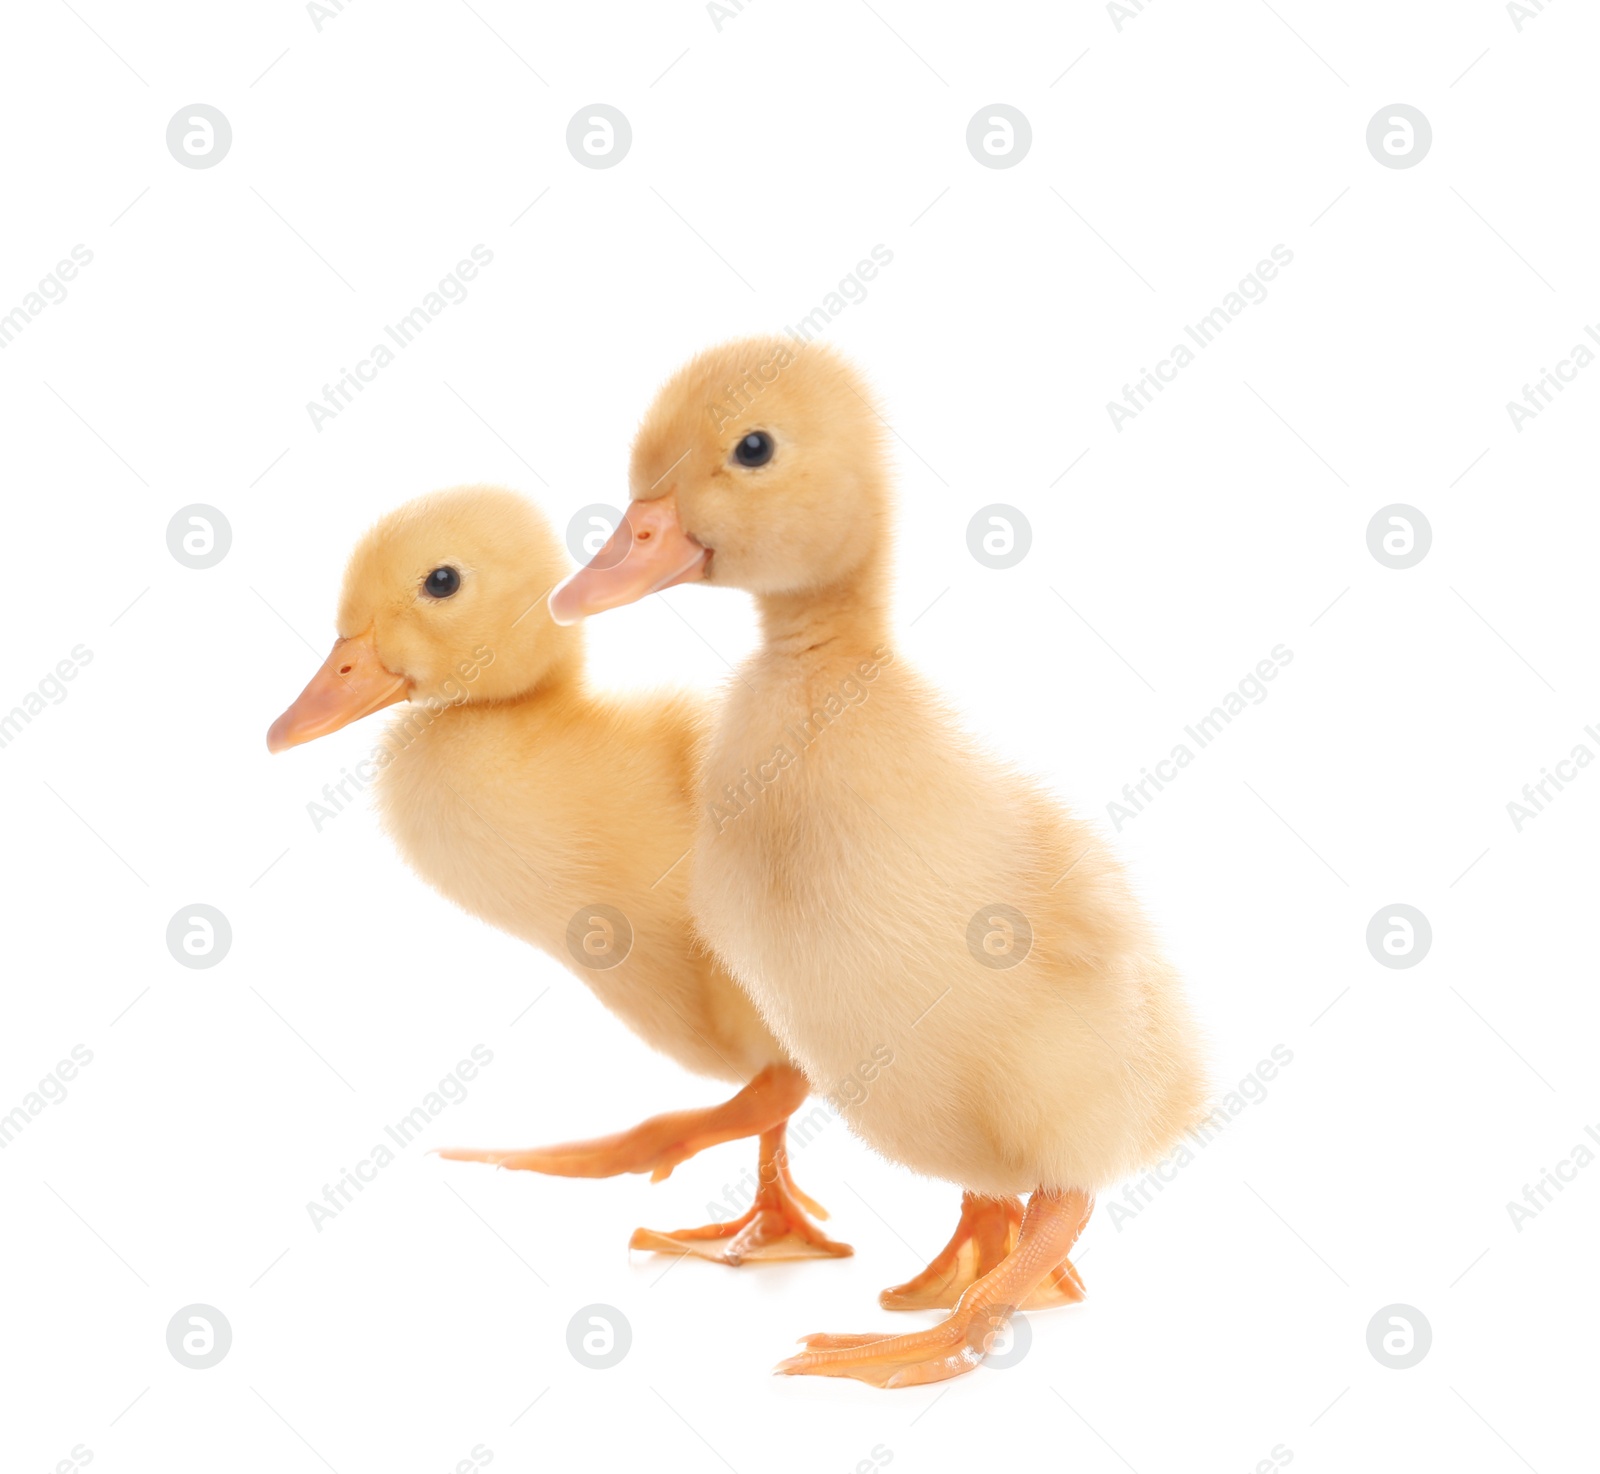 Photo of Cute fluffy baby ducklings on white background